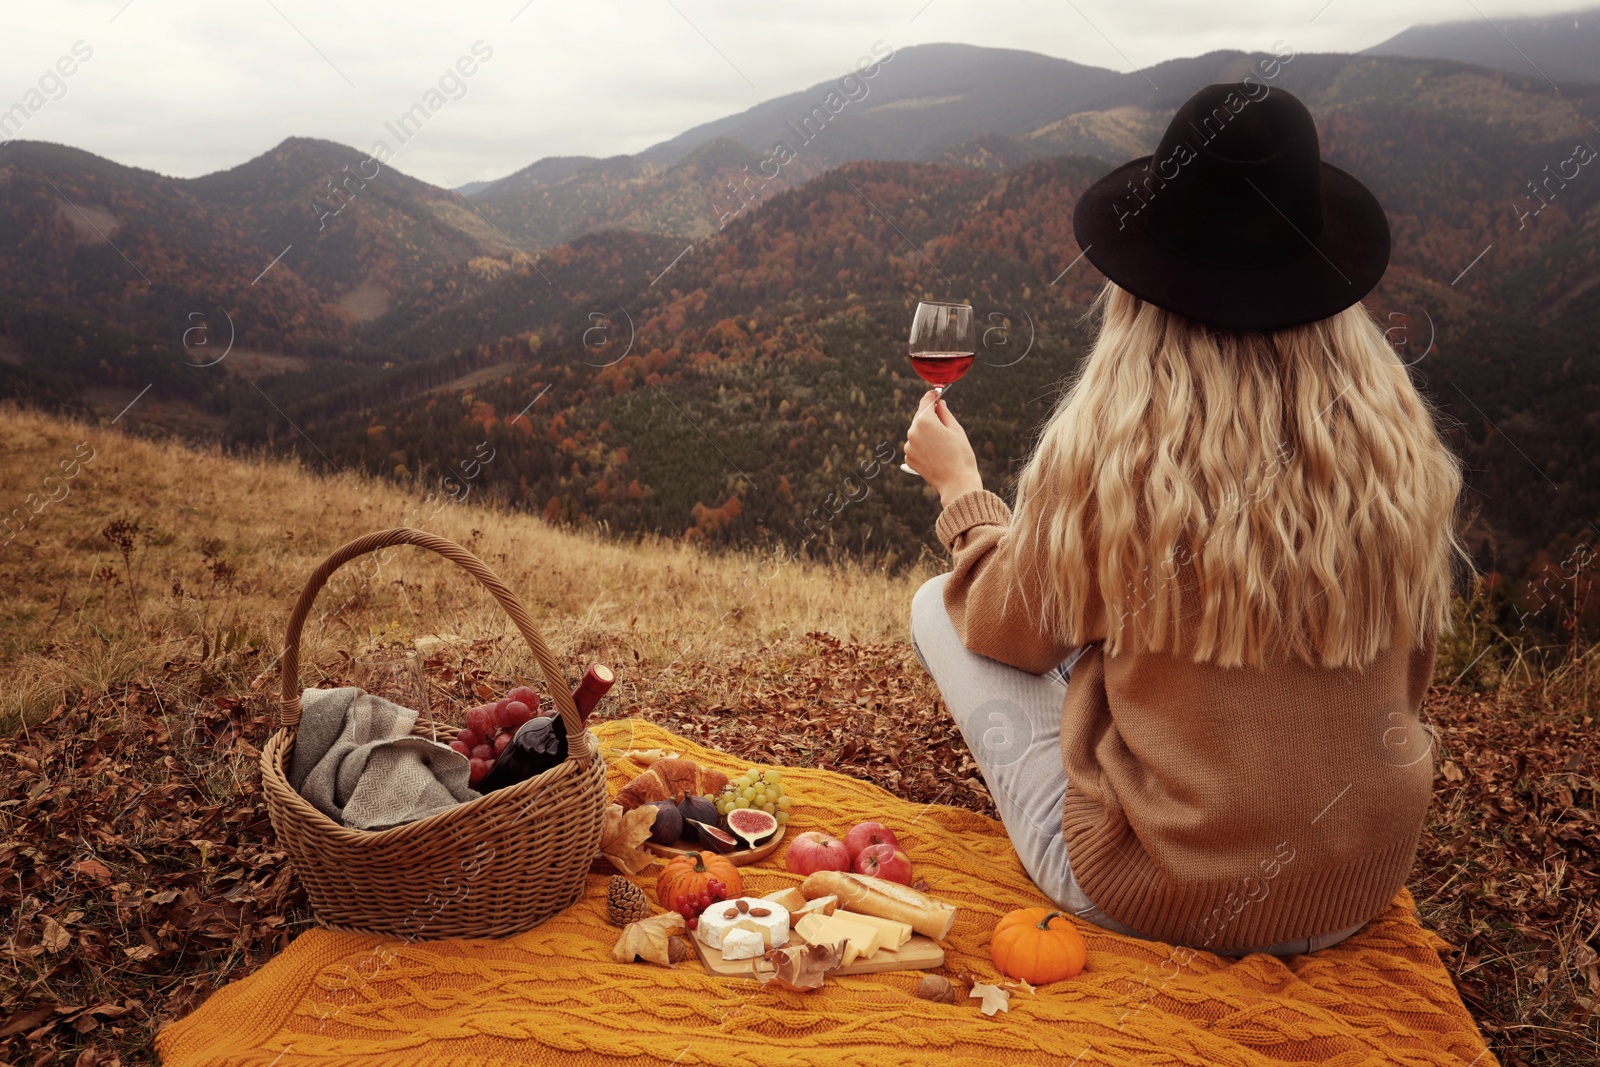 Image of Young woman with glass of wine having picnic in mountains on autumn day, back view